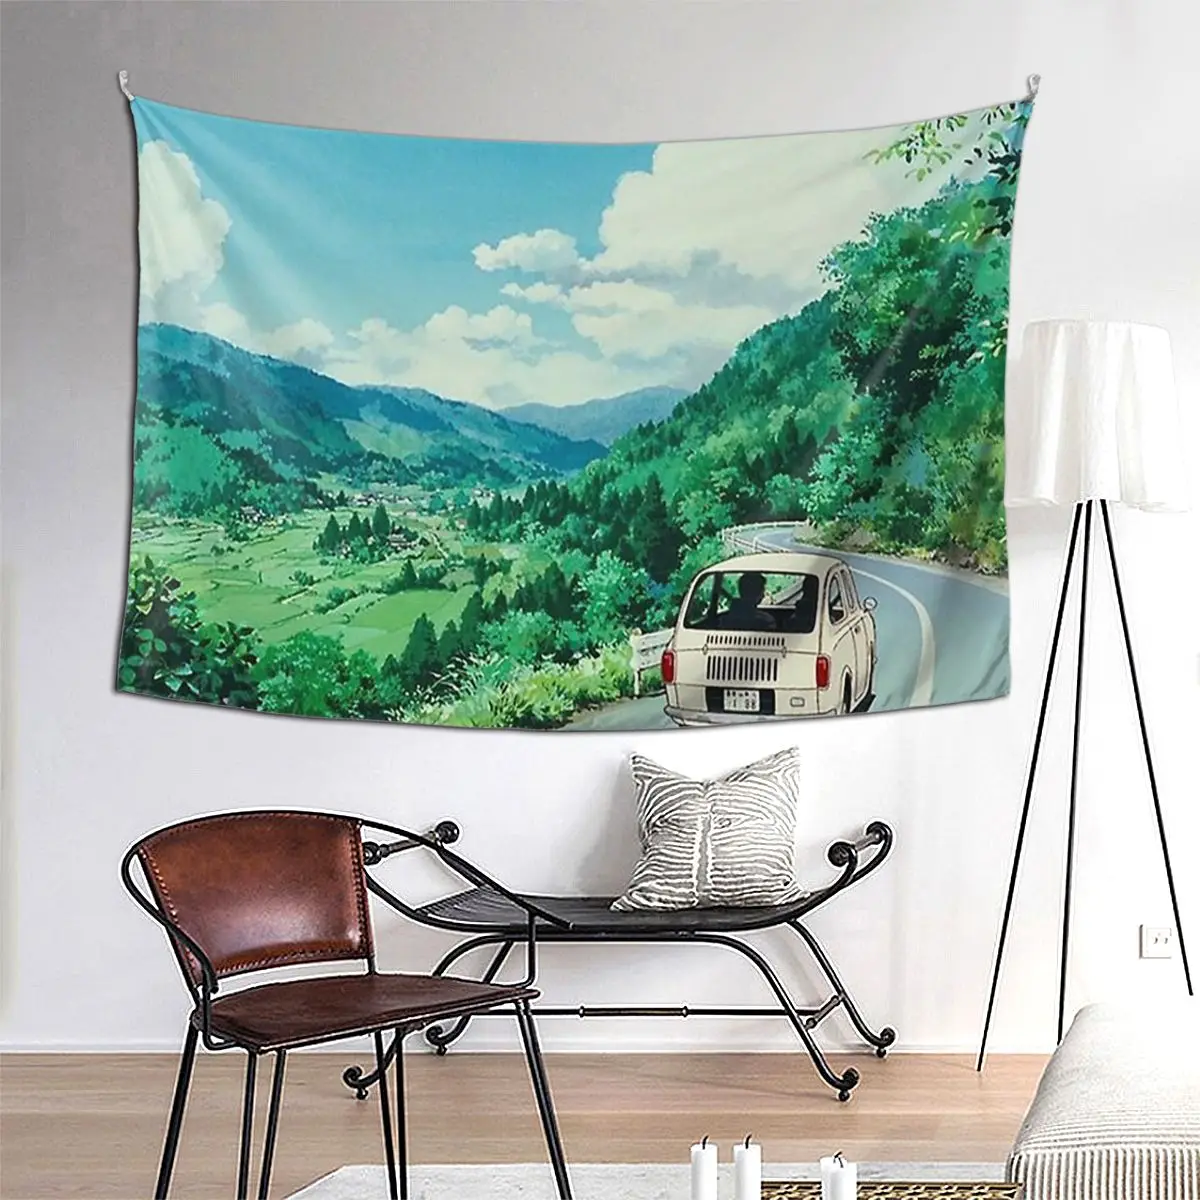 

Vintage Anime Road Scenery Tapestry Hippie Wall Hanging Aesthetic Home Decor Tapestries for Living Room Bedroom Dorm Room